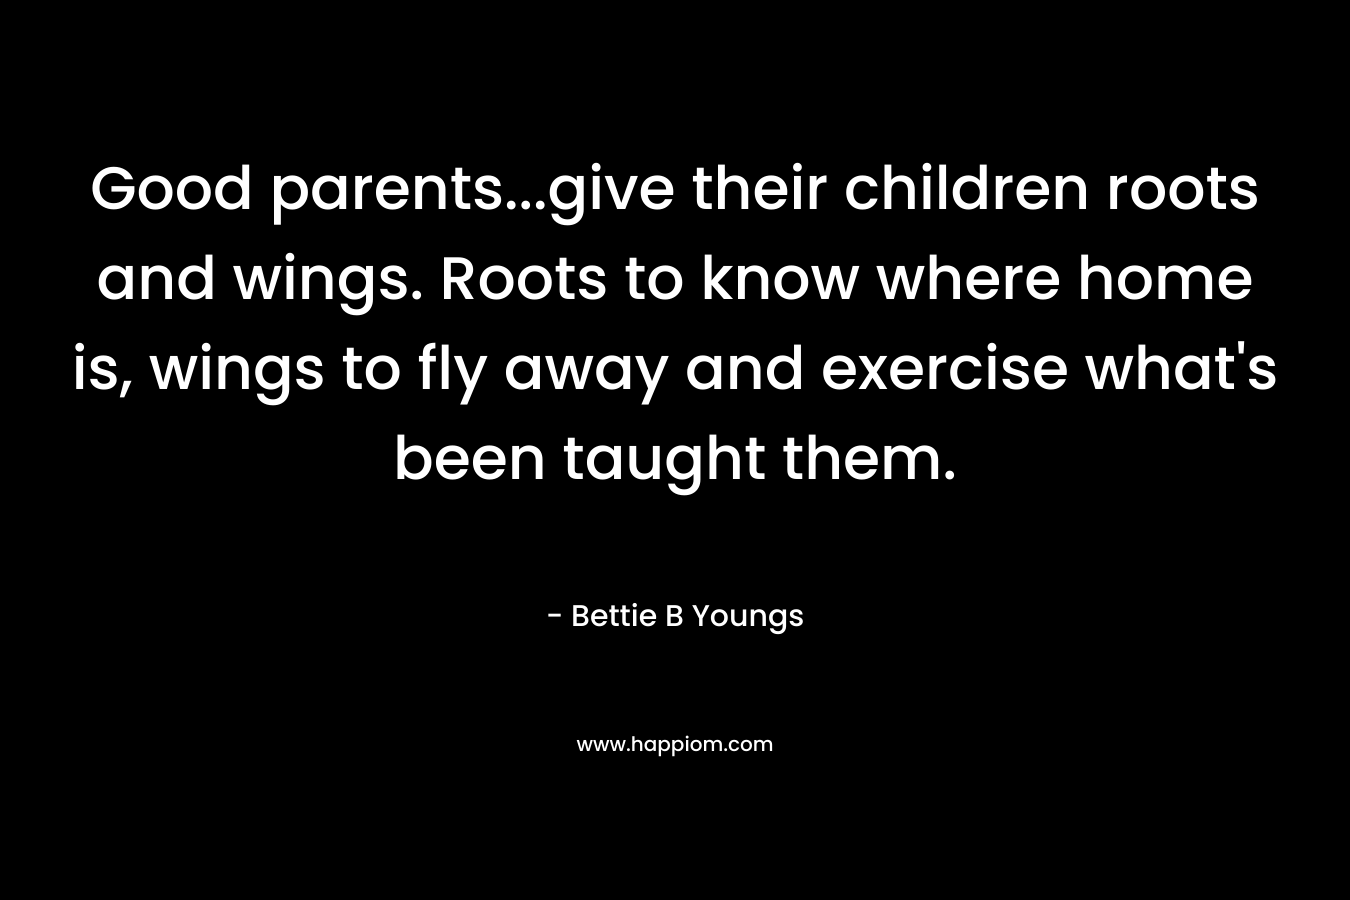 Good parents...give their children roots and wings. Roots to know where home is, wings to fly away and exercise what's been taught them.